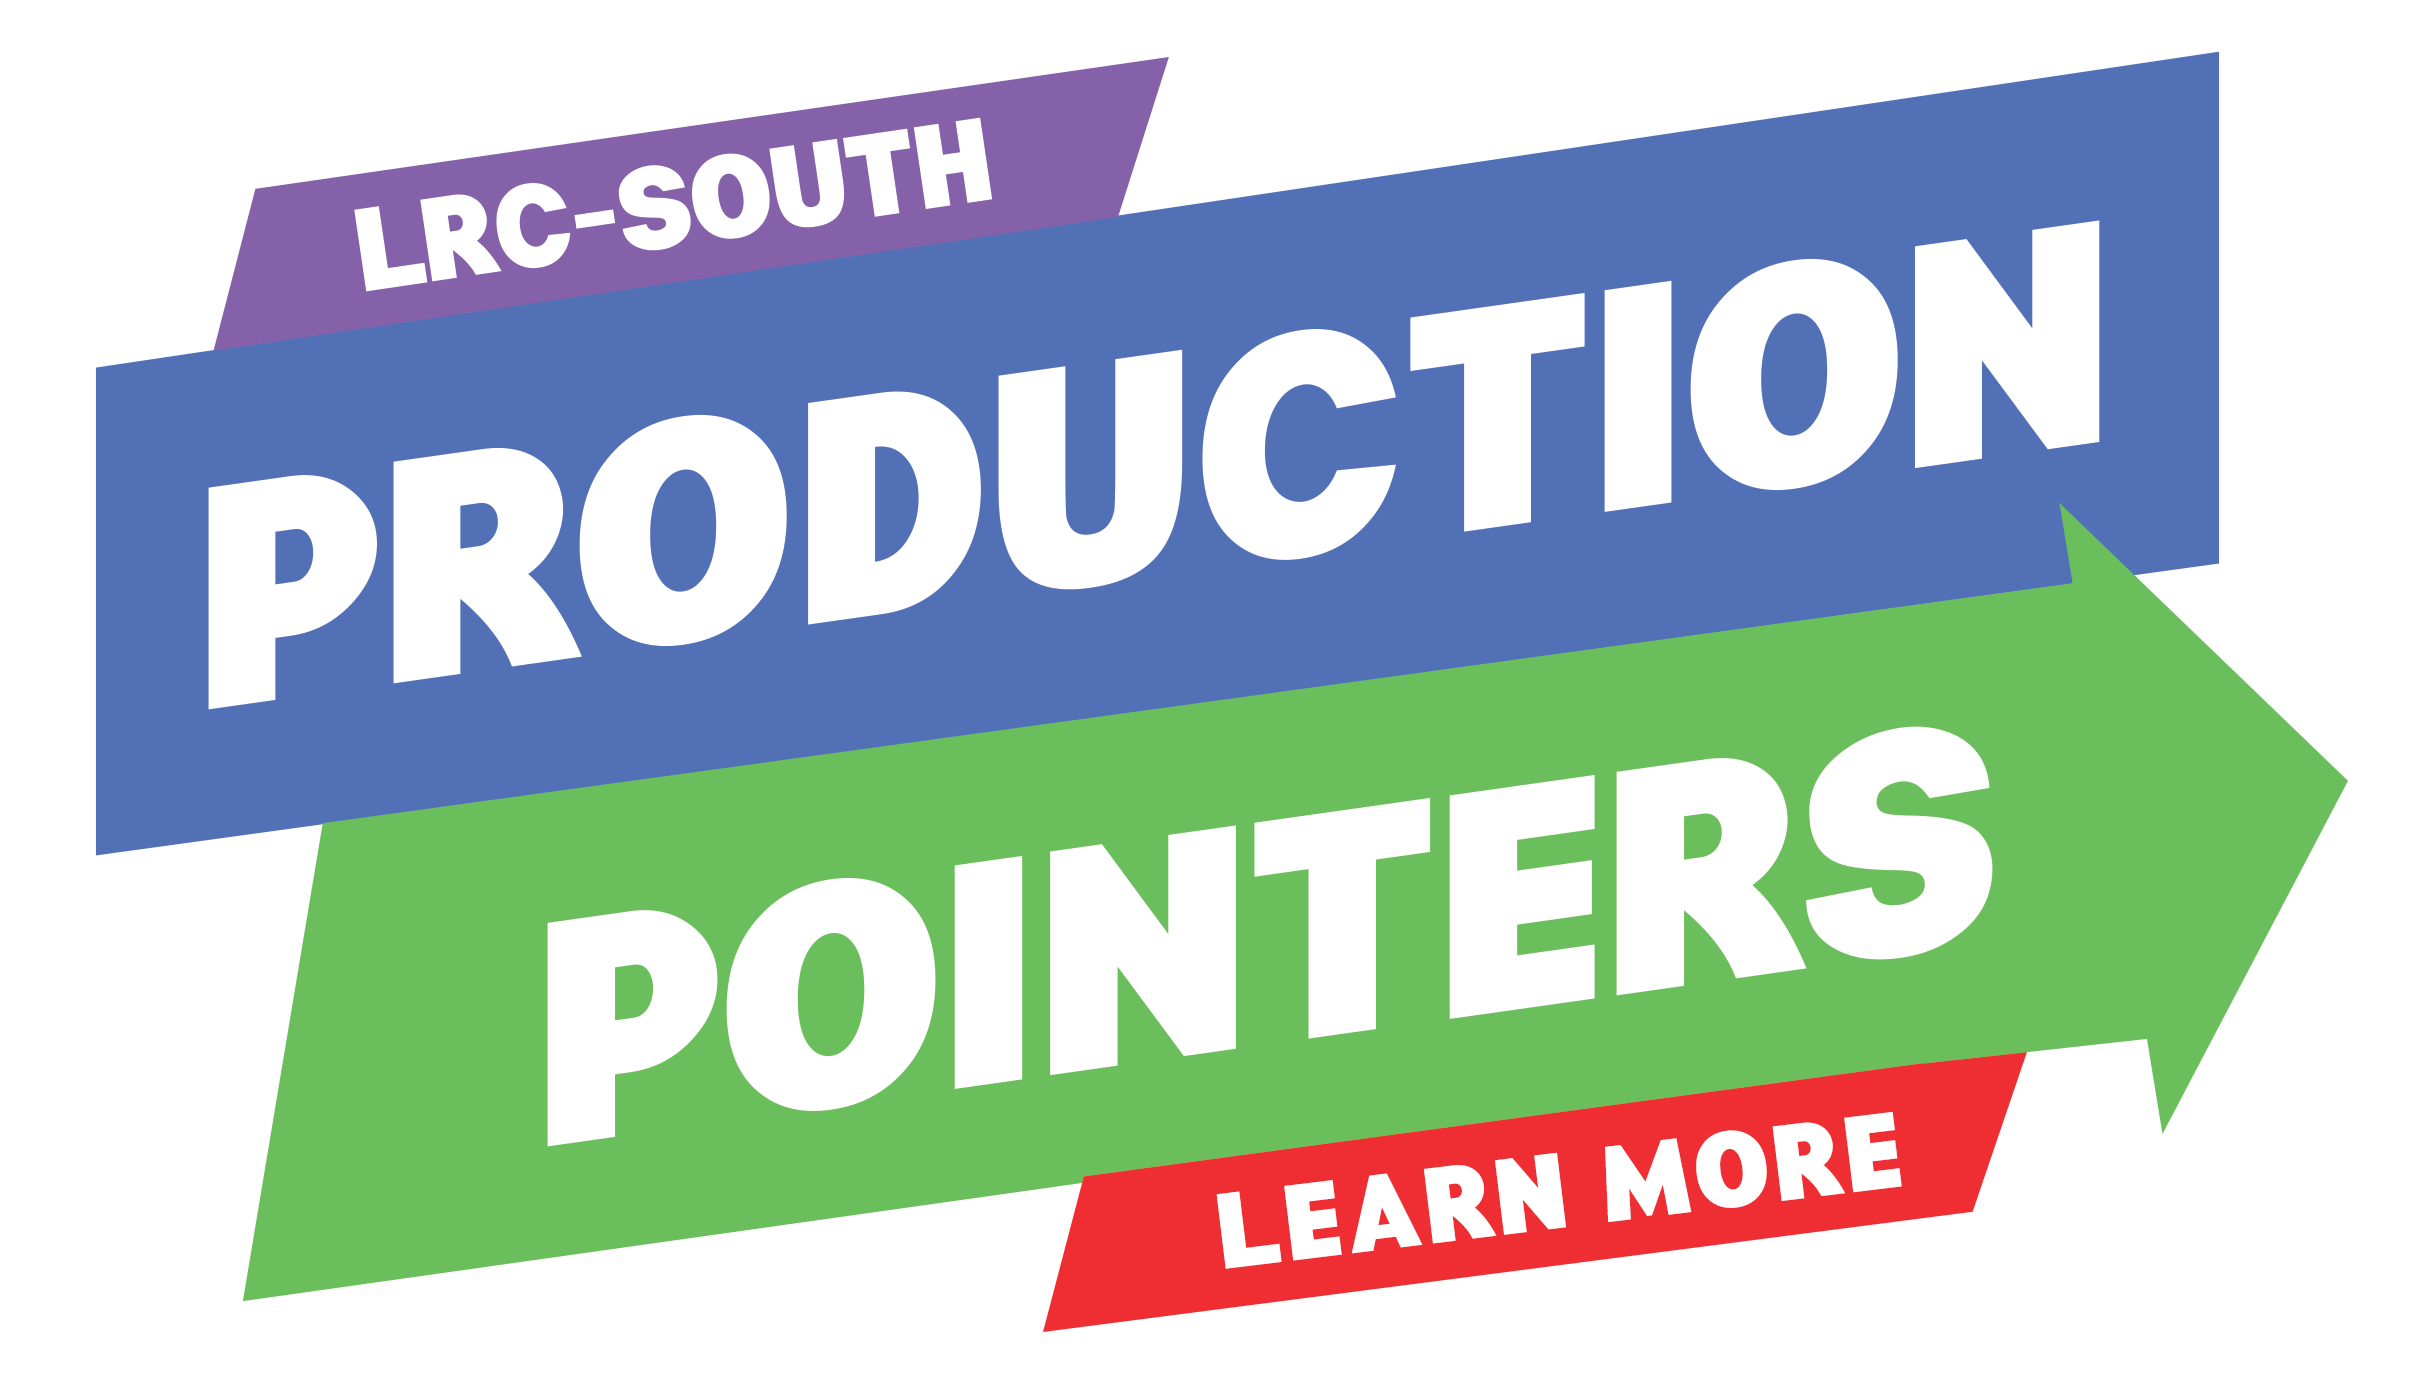 LRC-South Production Pointers